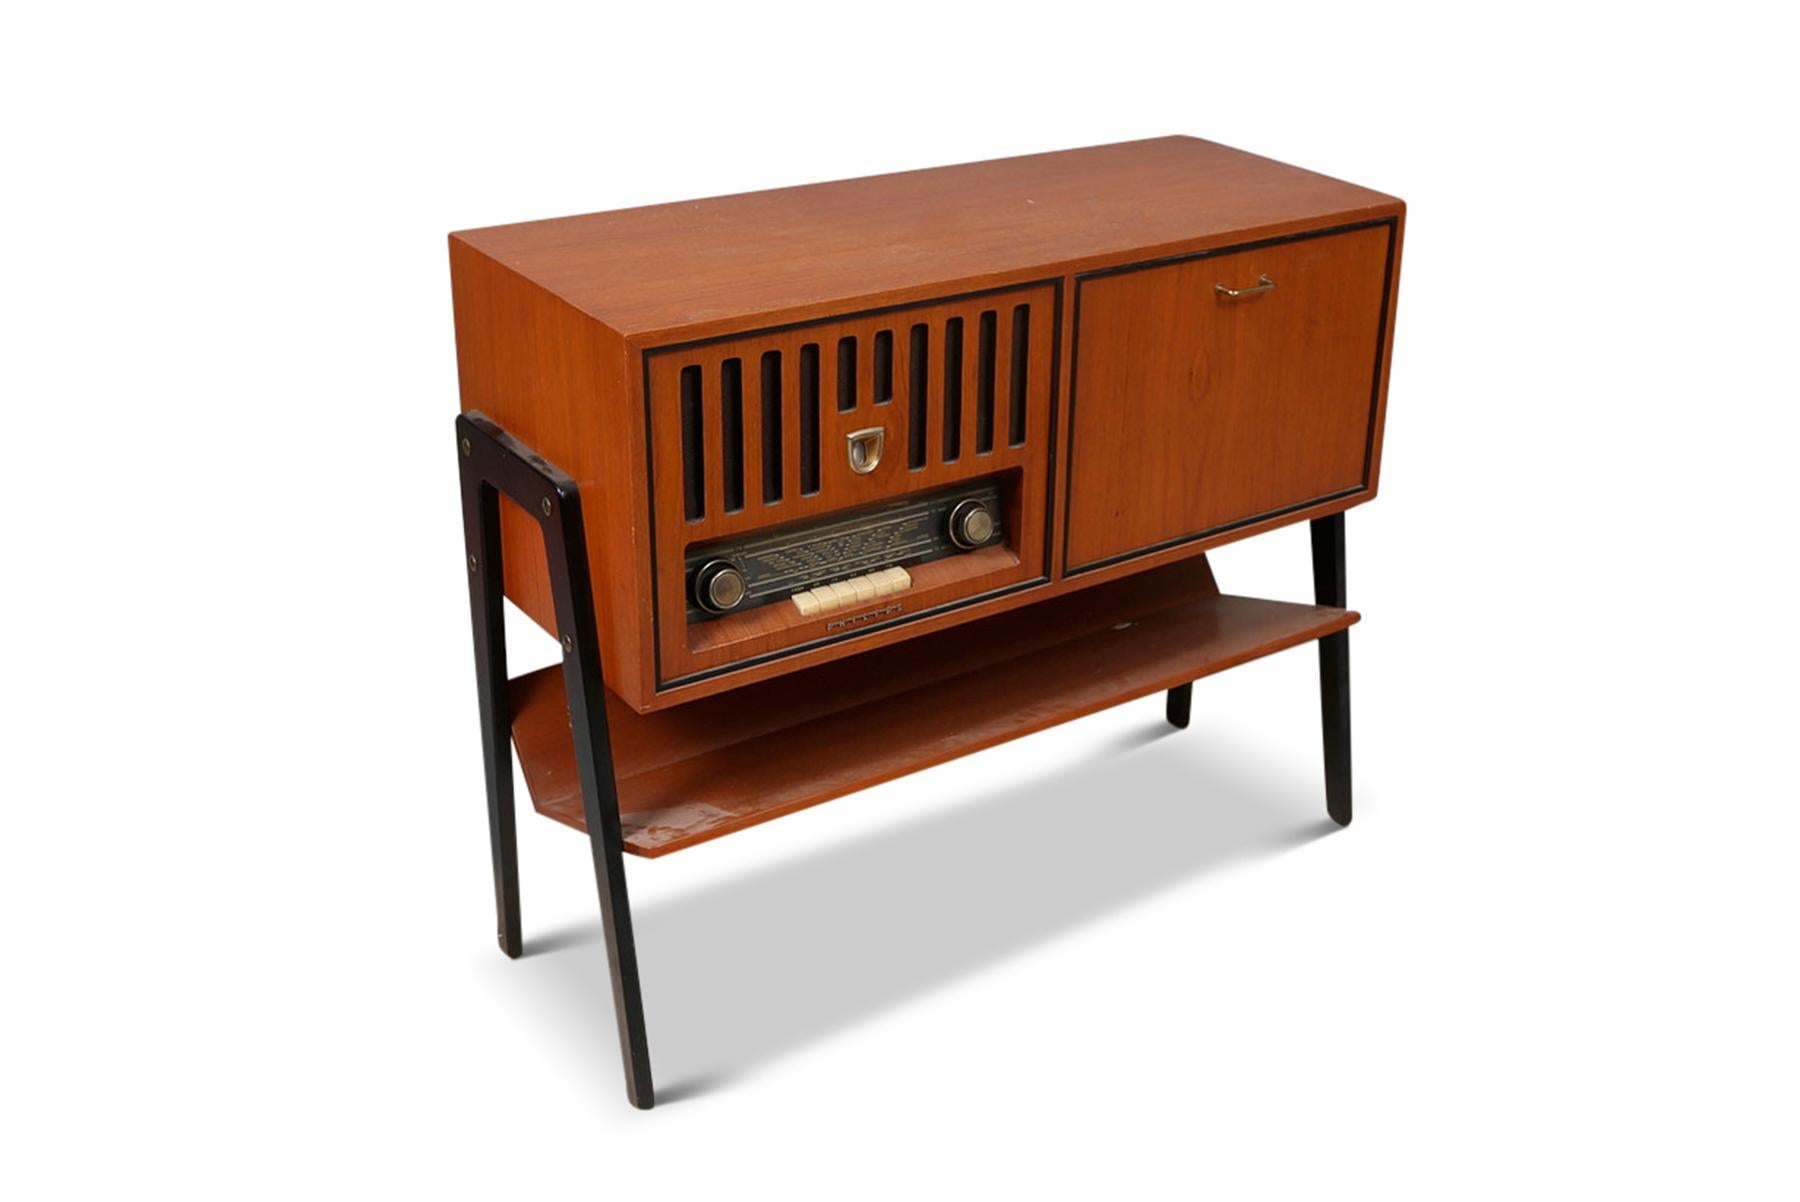 Philips Type FS 665 a Record Console in Teak In Good Condition For Sale In Berkeley, CA